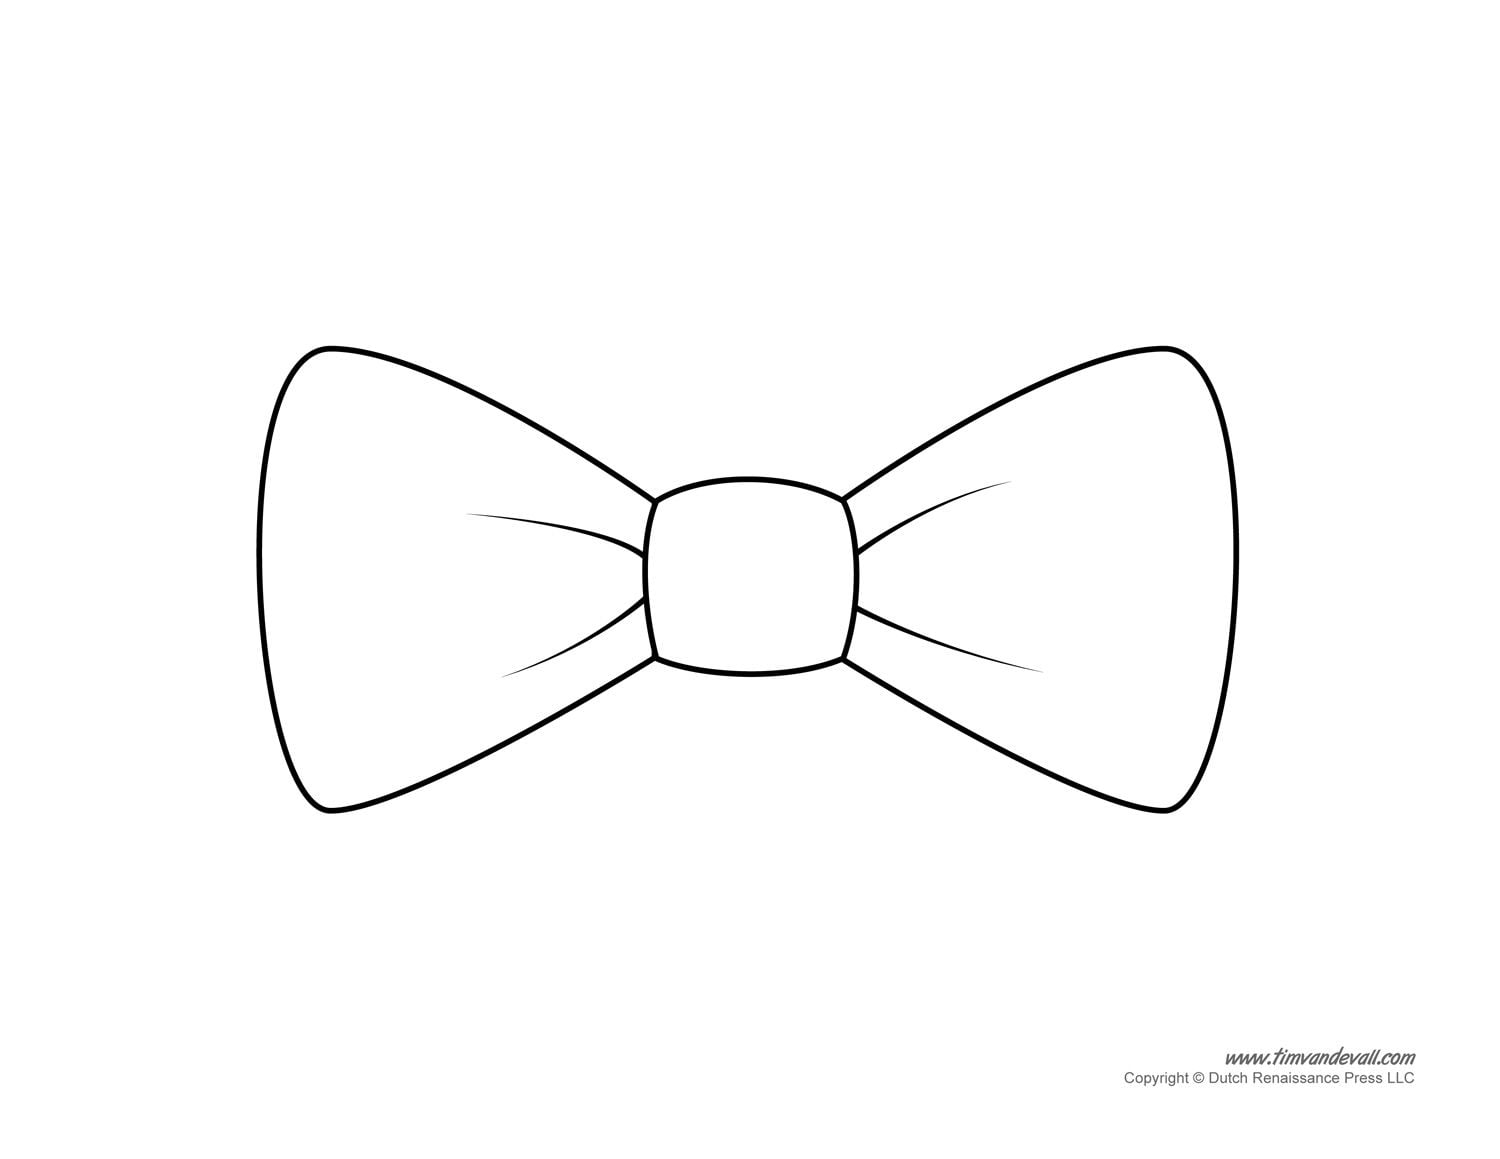 Paper Bow Tie Templates Bow Tie Printables Bow Tie Template Tie Template Paper Bow